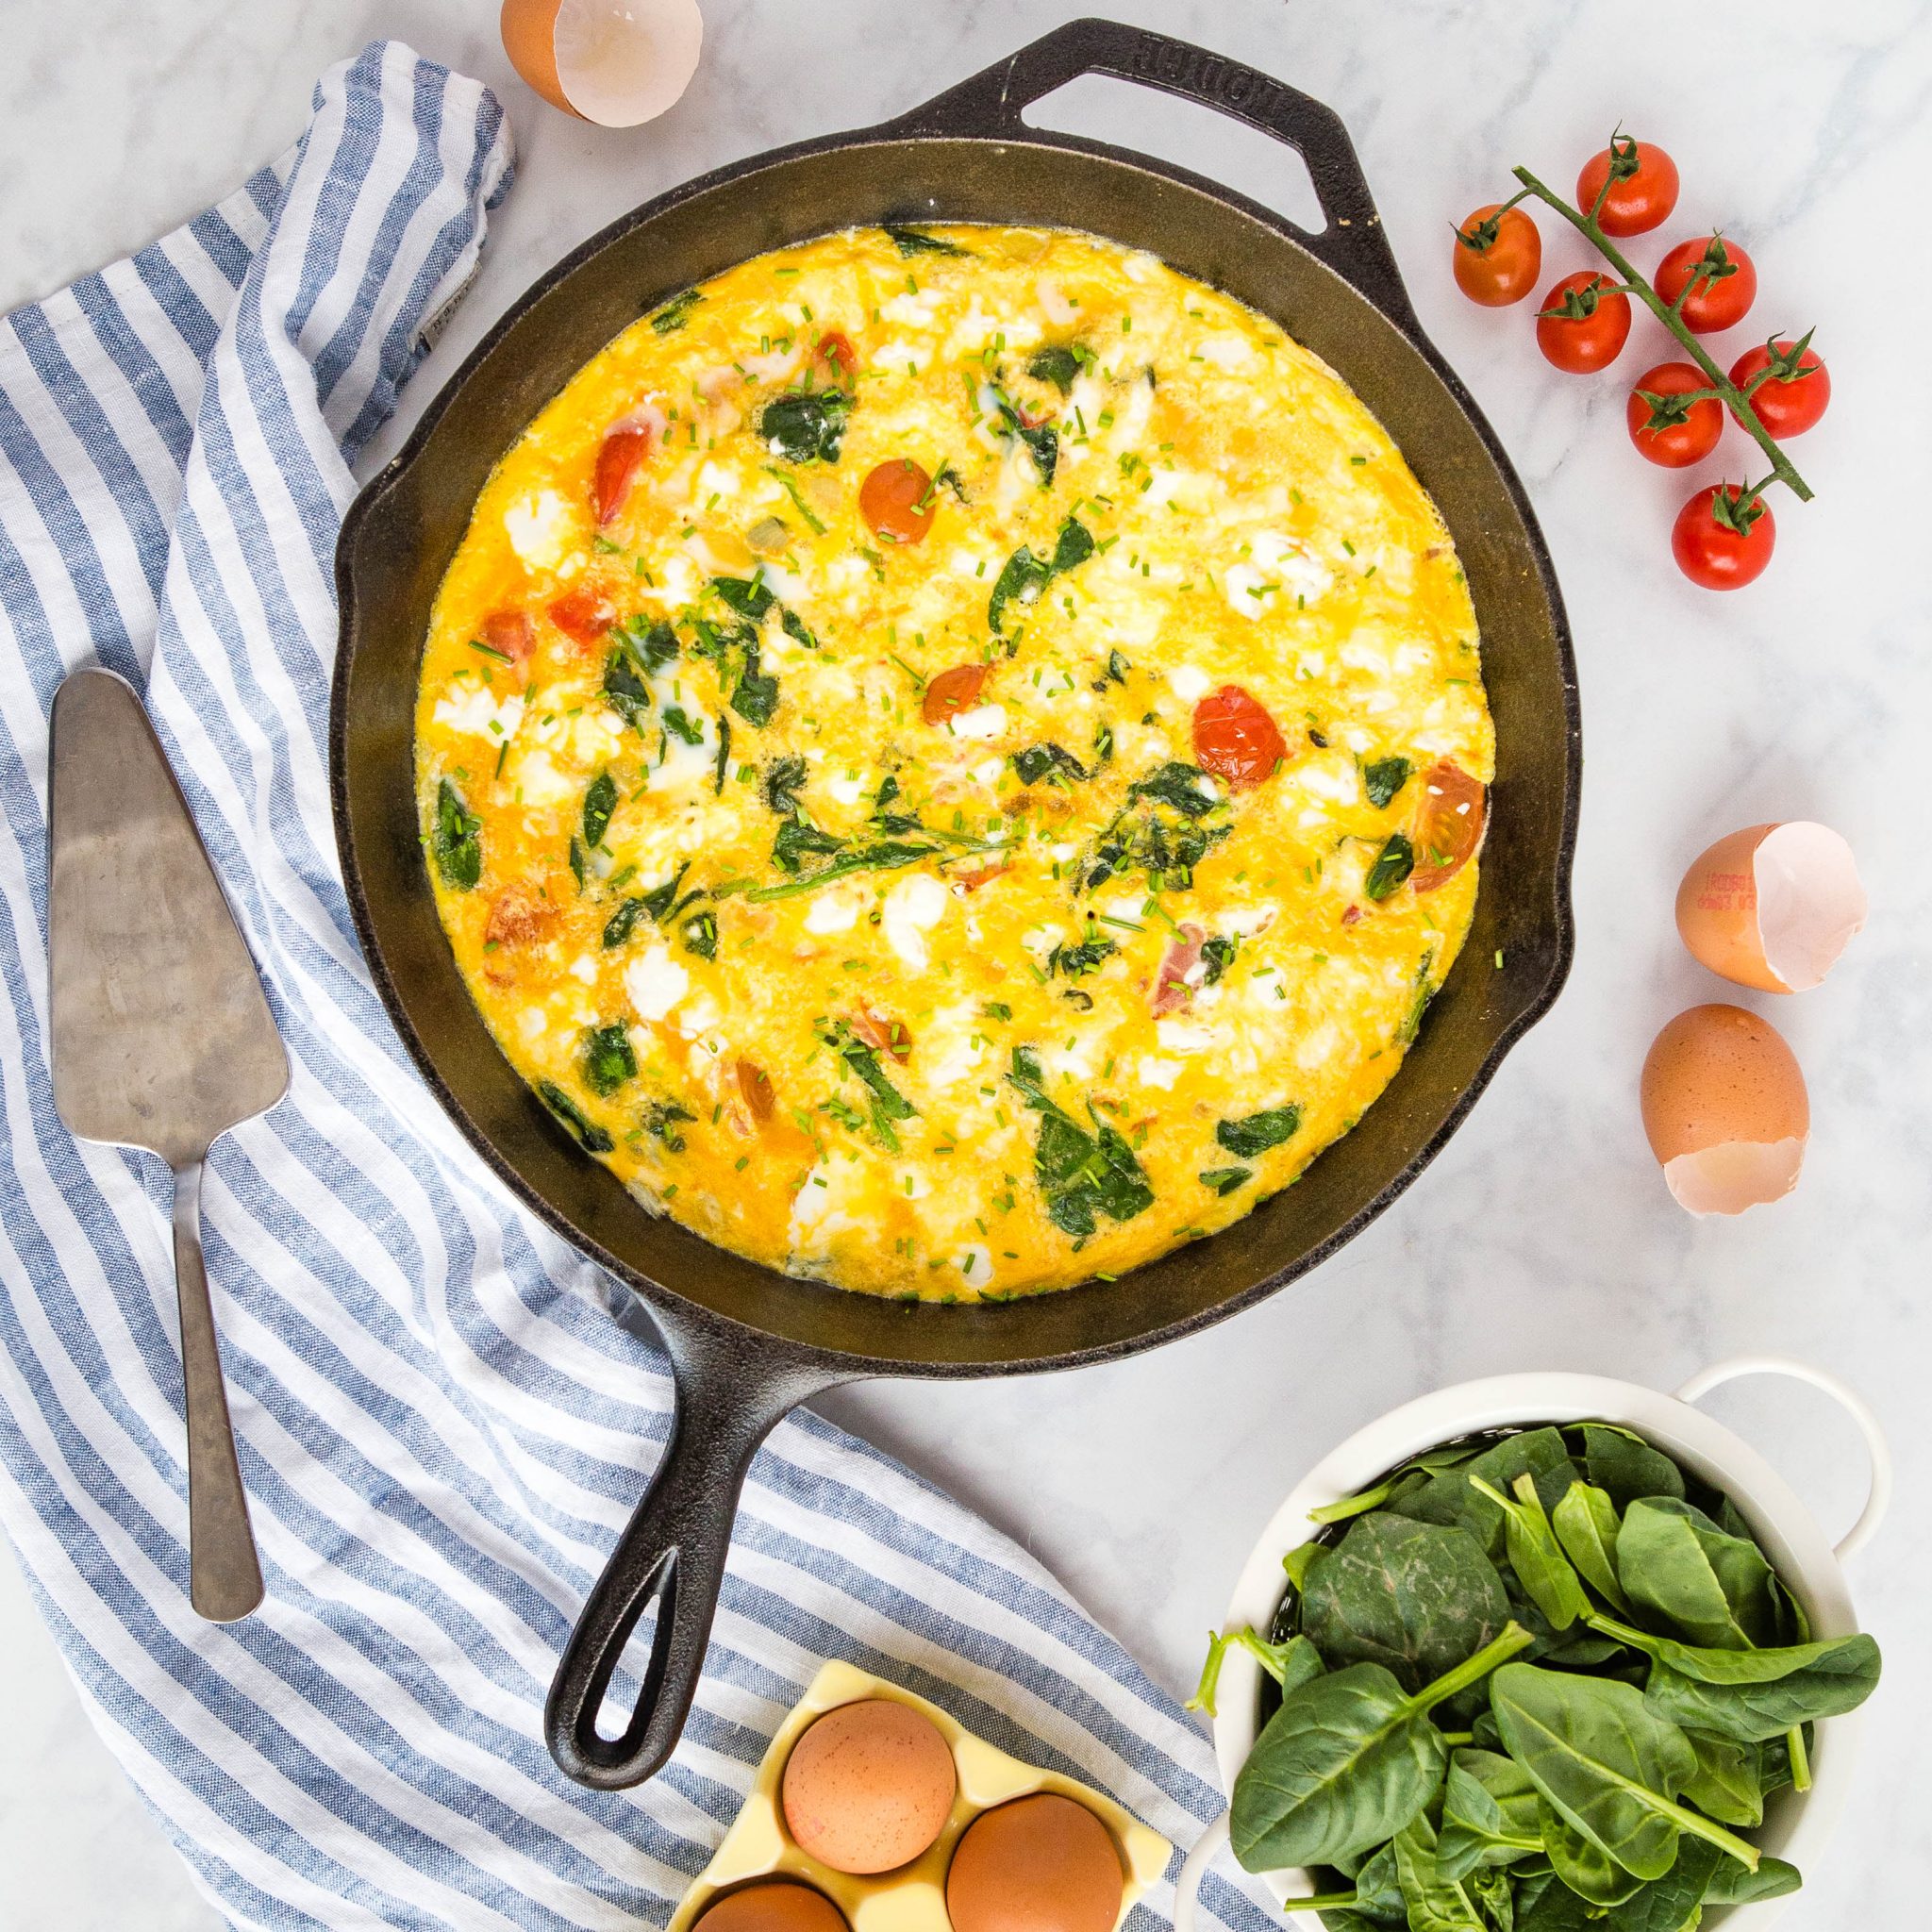 https://thebusybaker.ca/wp-content/uploads/2020/04/tomato-spinach-skillet-frittata-fb-ig-2-scaled.jpg